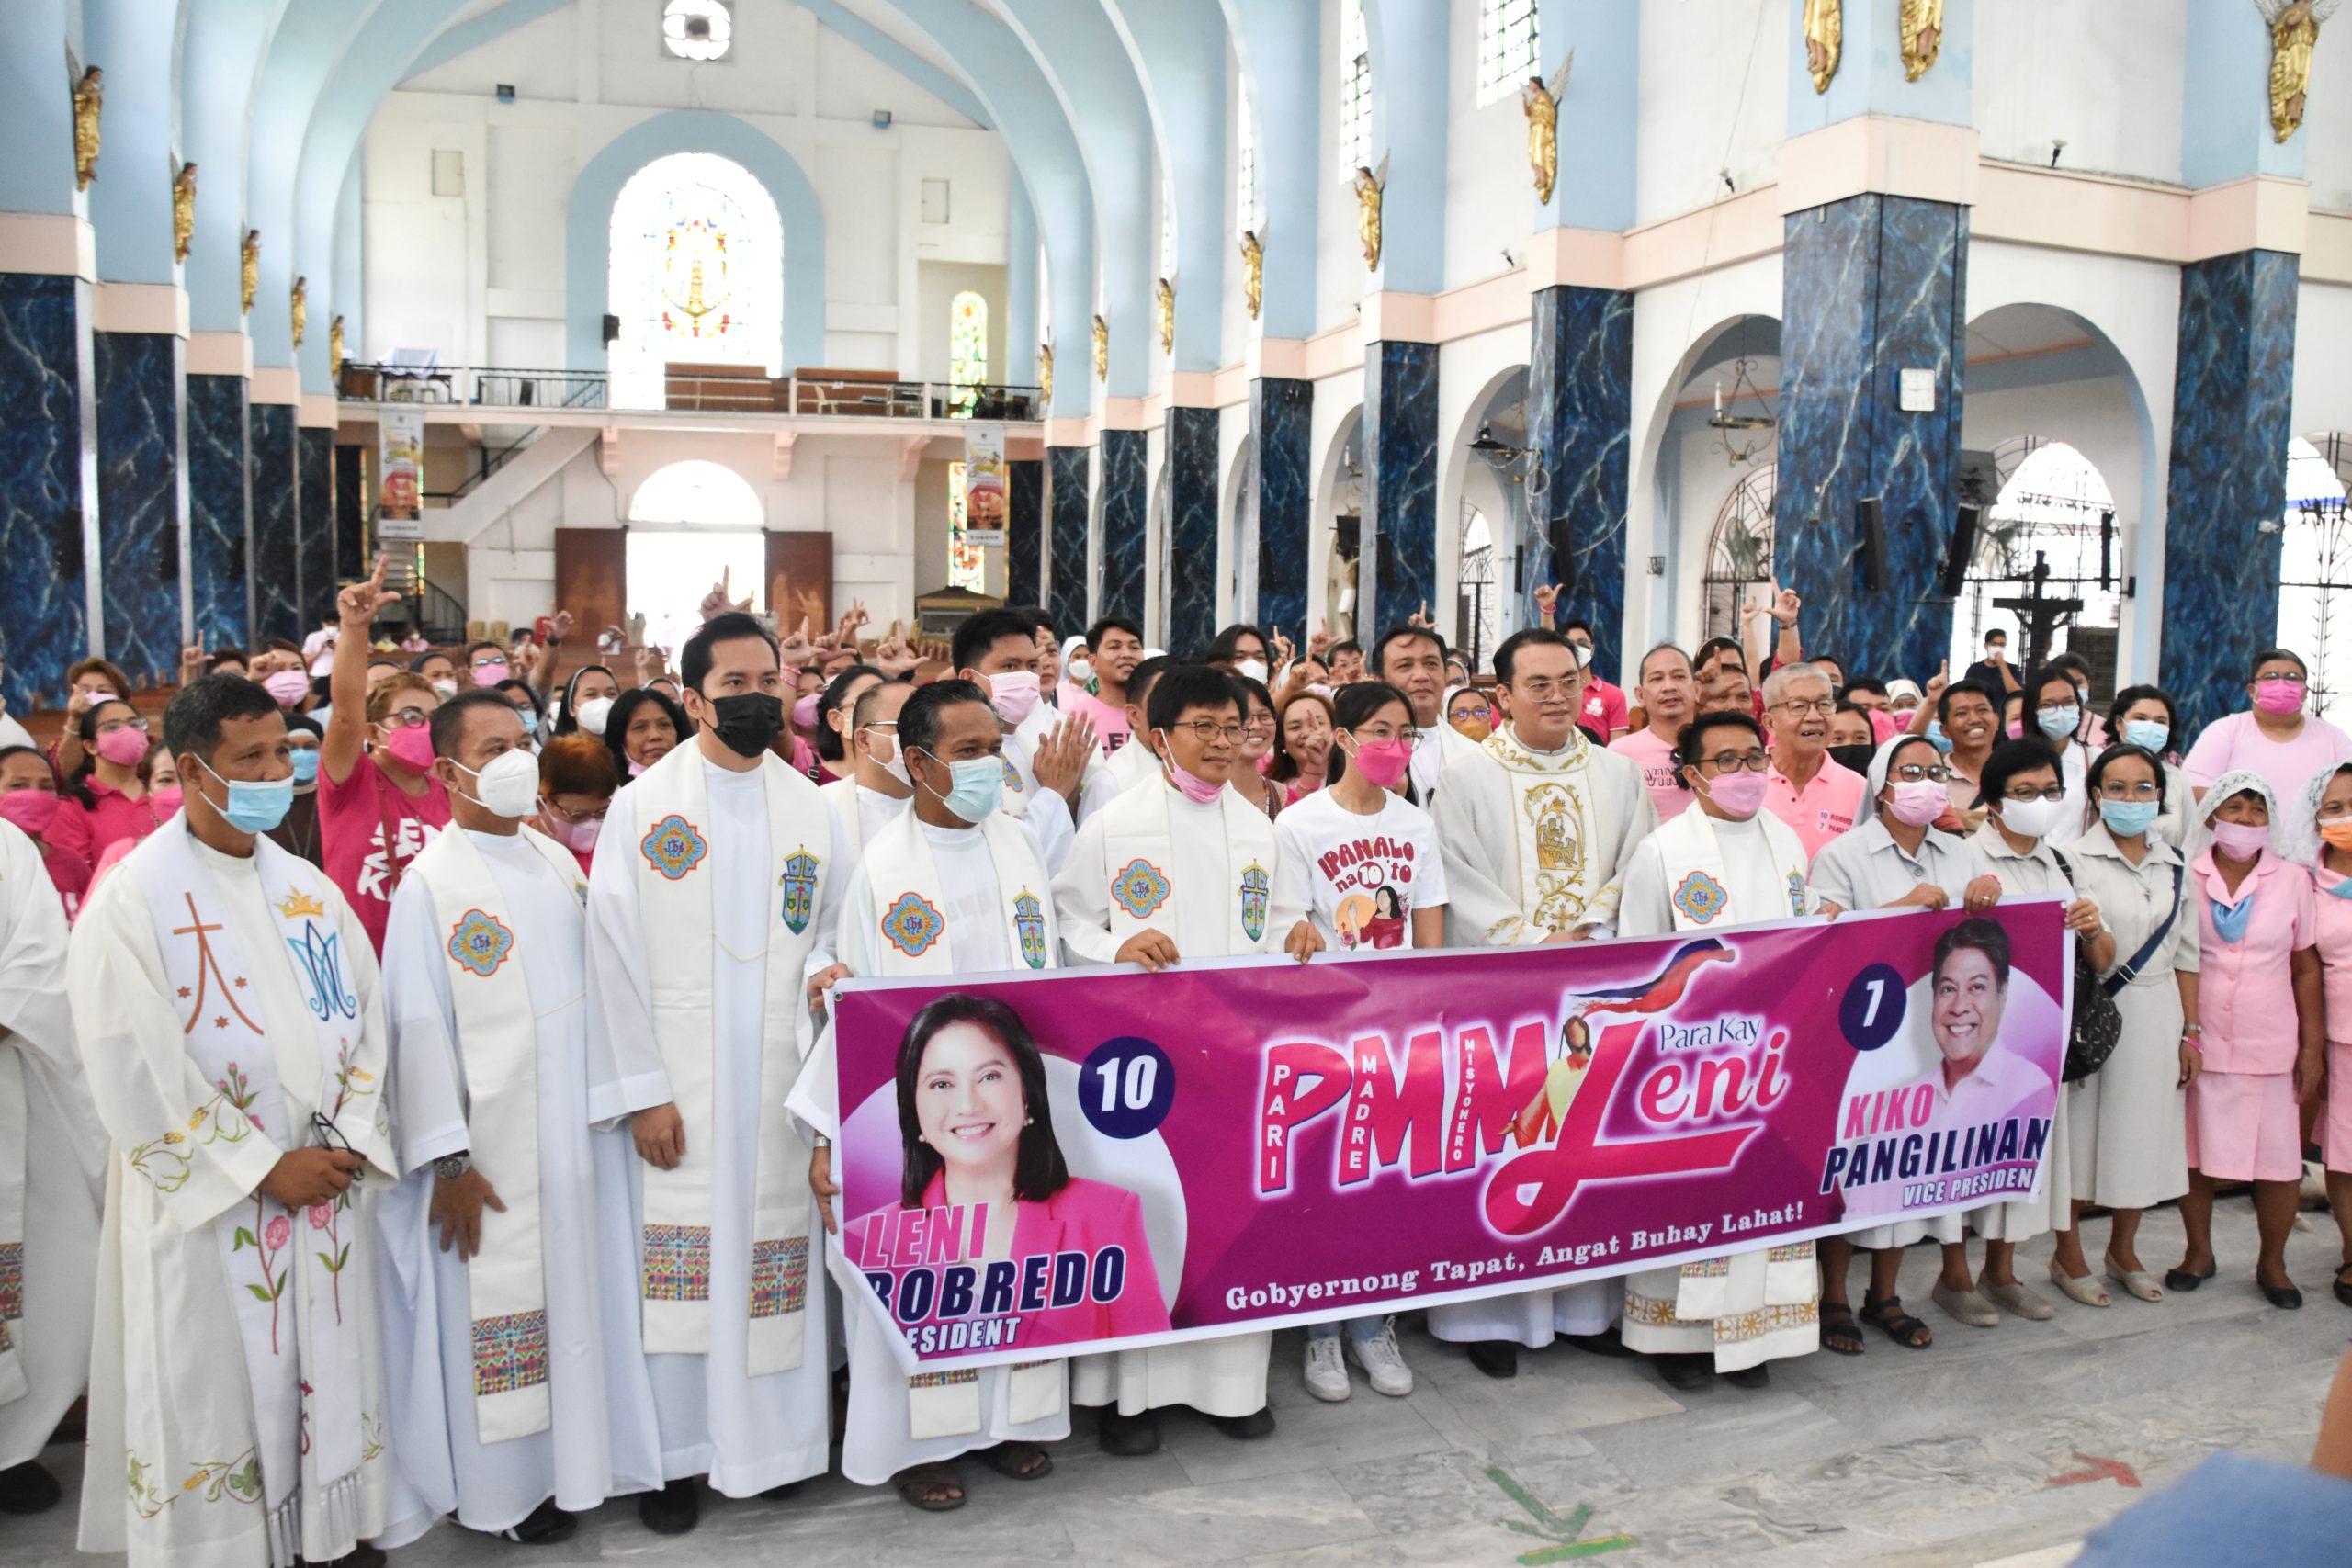 Cebuano priests have a photo-ops as they formally endorse the presidential bid of Vice President Leni Robredo and her running mate, Senator Francis Pangilinan